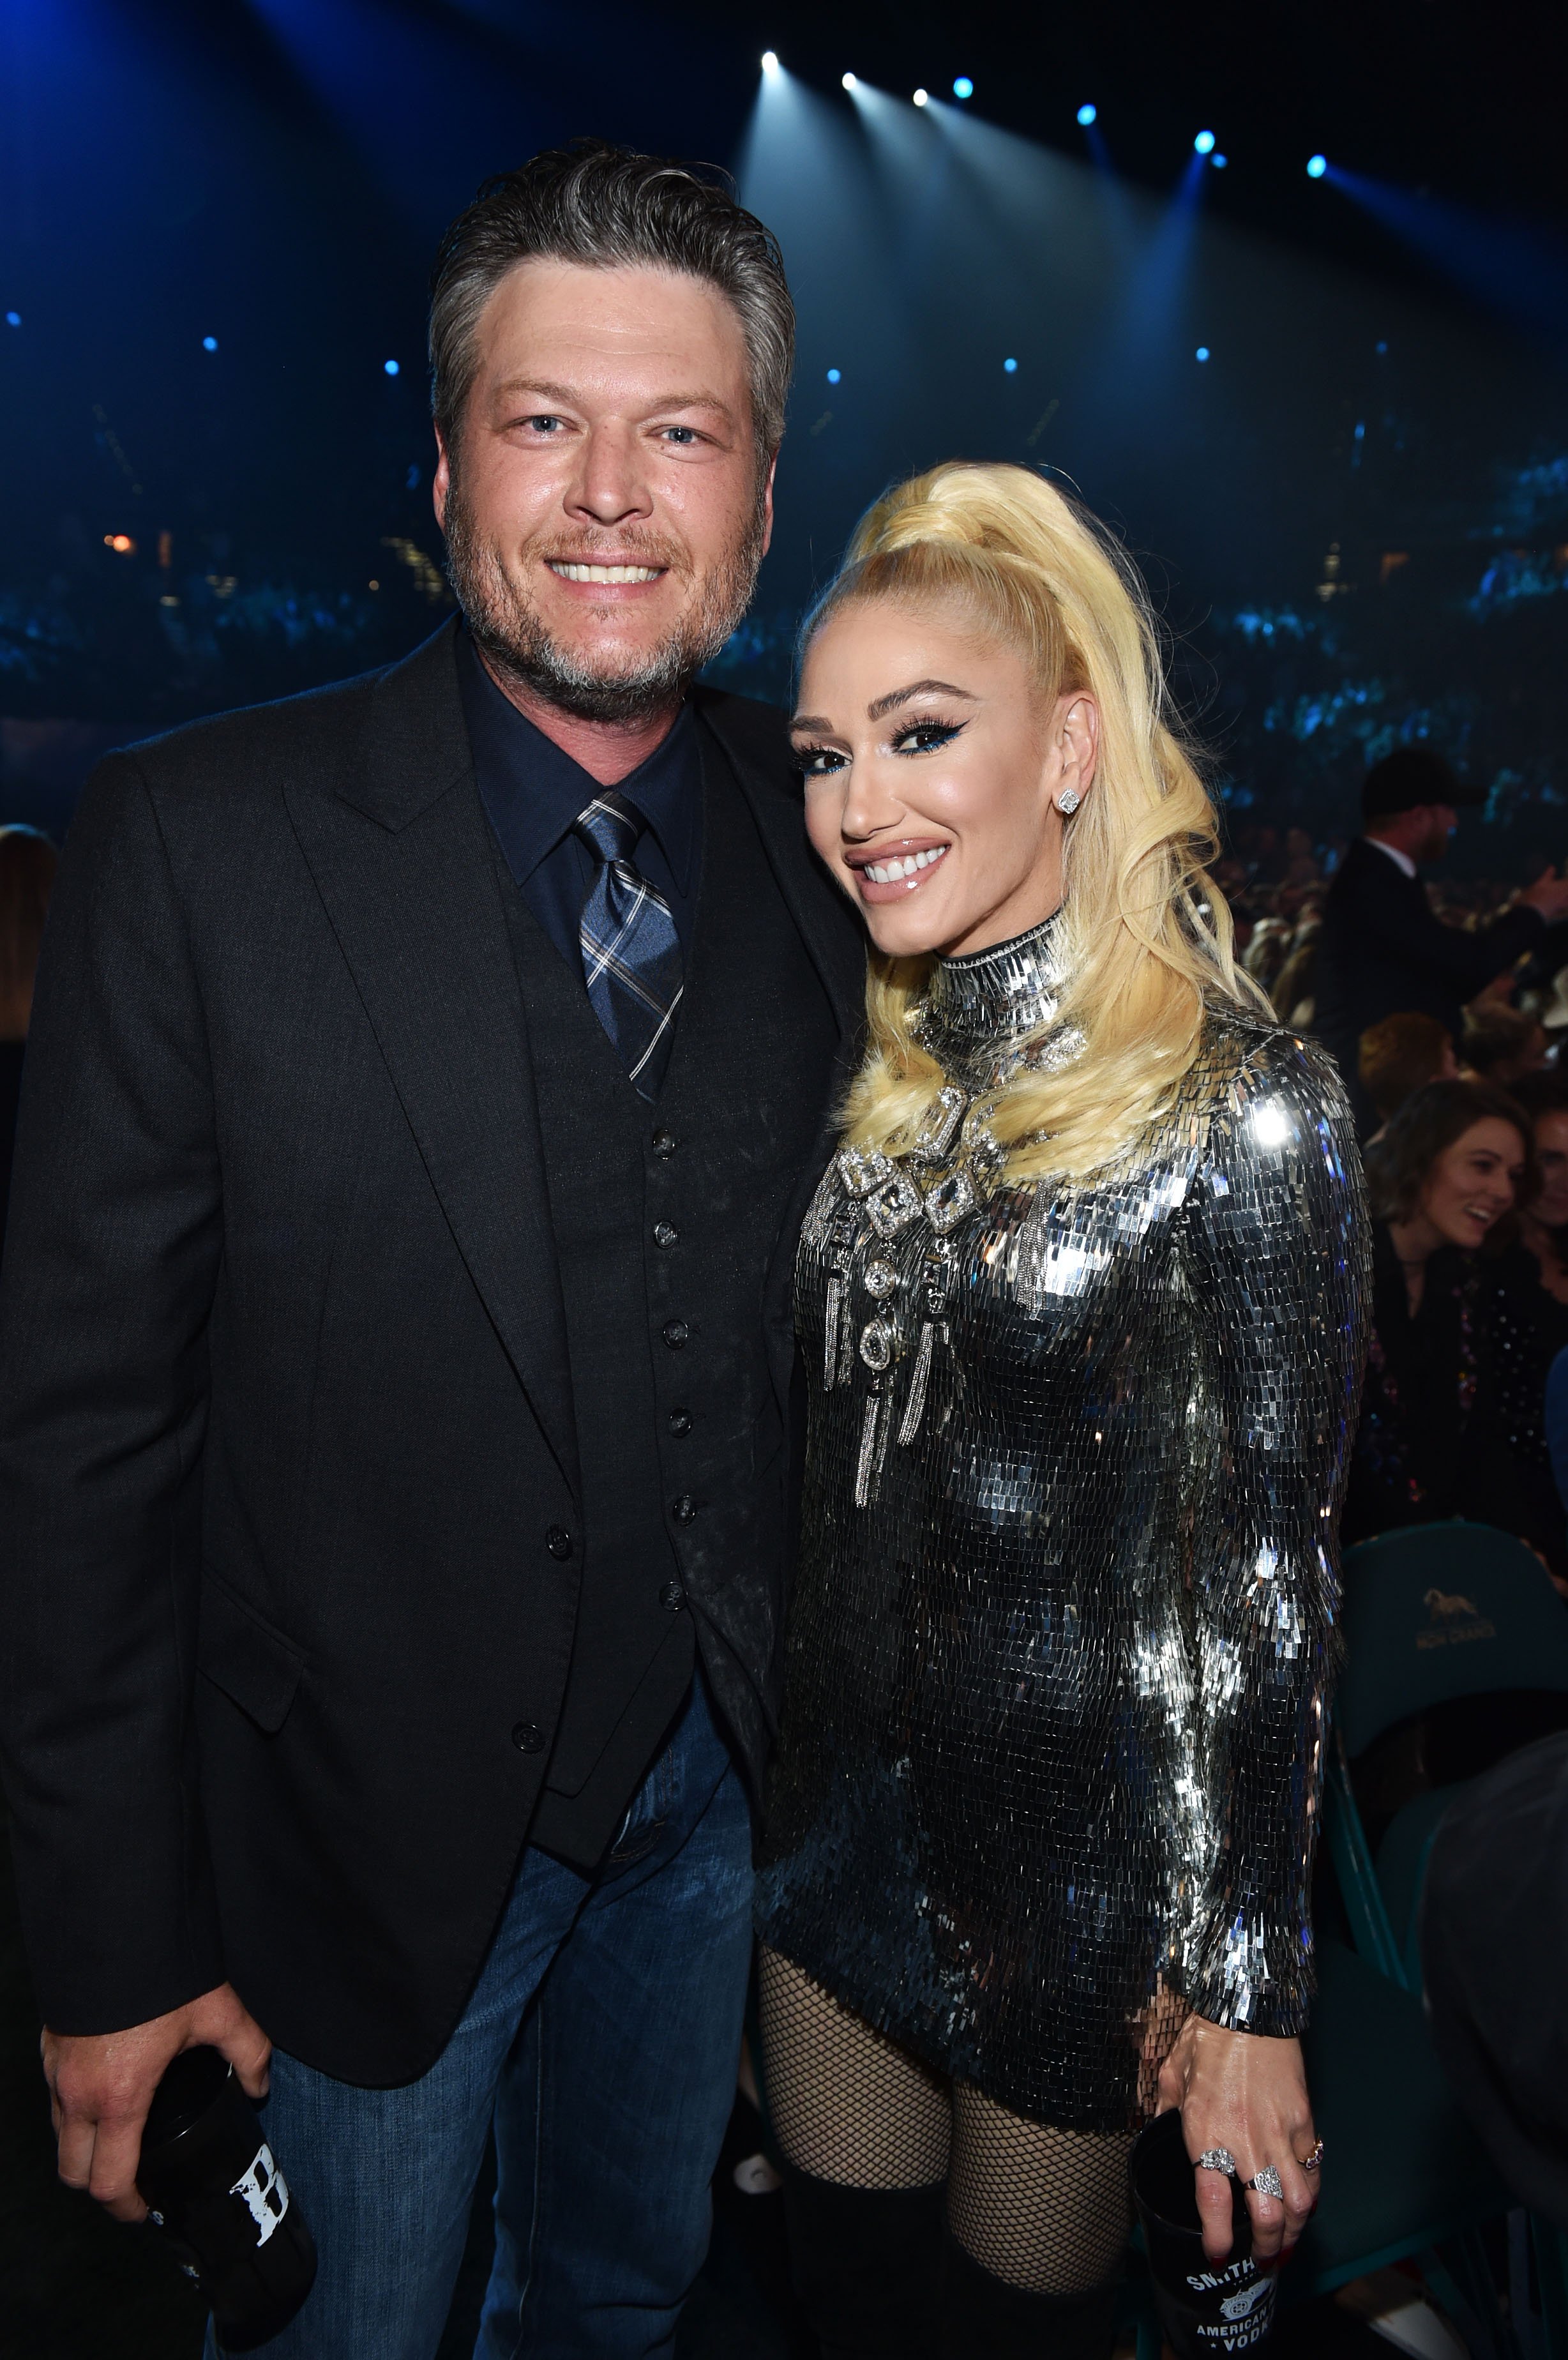 Blake Shelton and Gwen Stefani attend the 54th Academy Of Country Music Awards on April 07, 2019 in Las Vegas, Nevada.